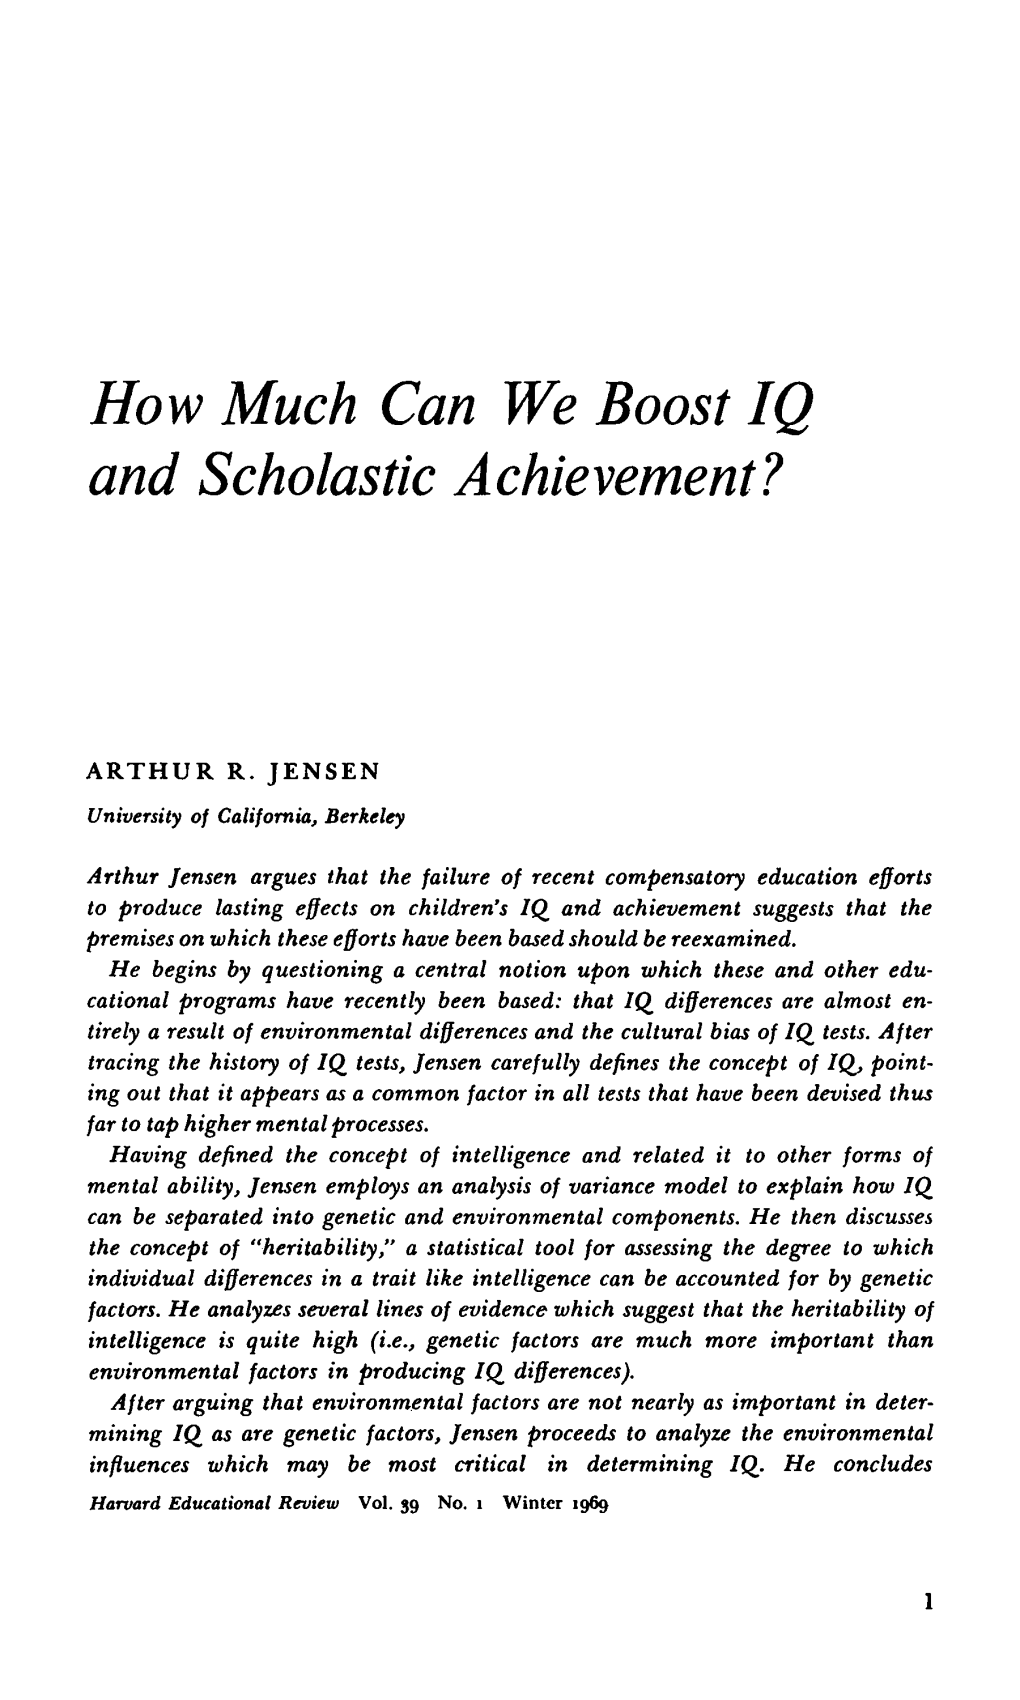 How Much Can We Boost IQ and Scholastic Achievement?